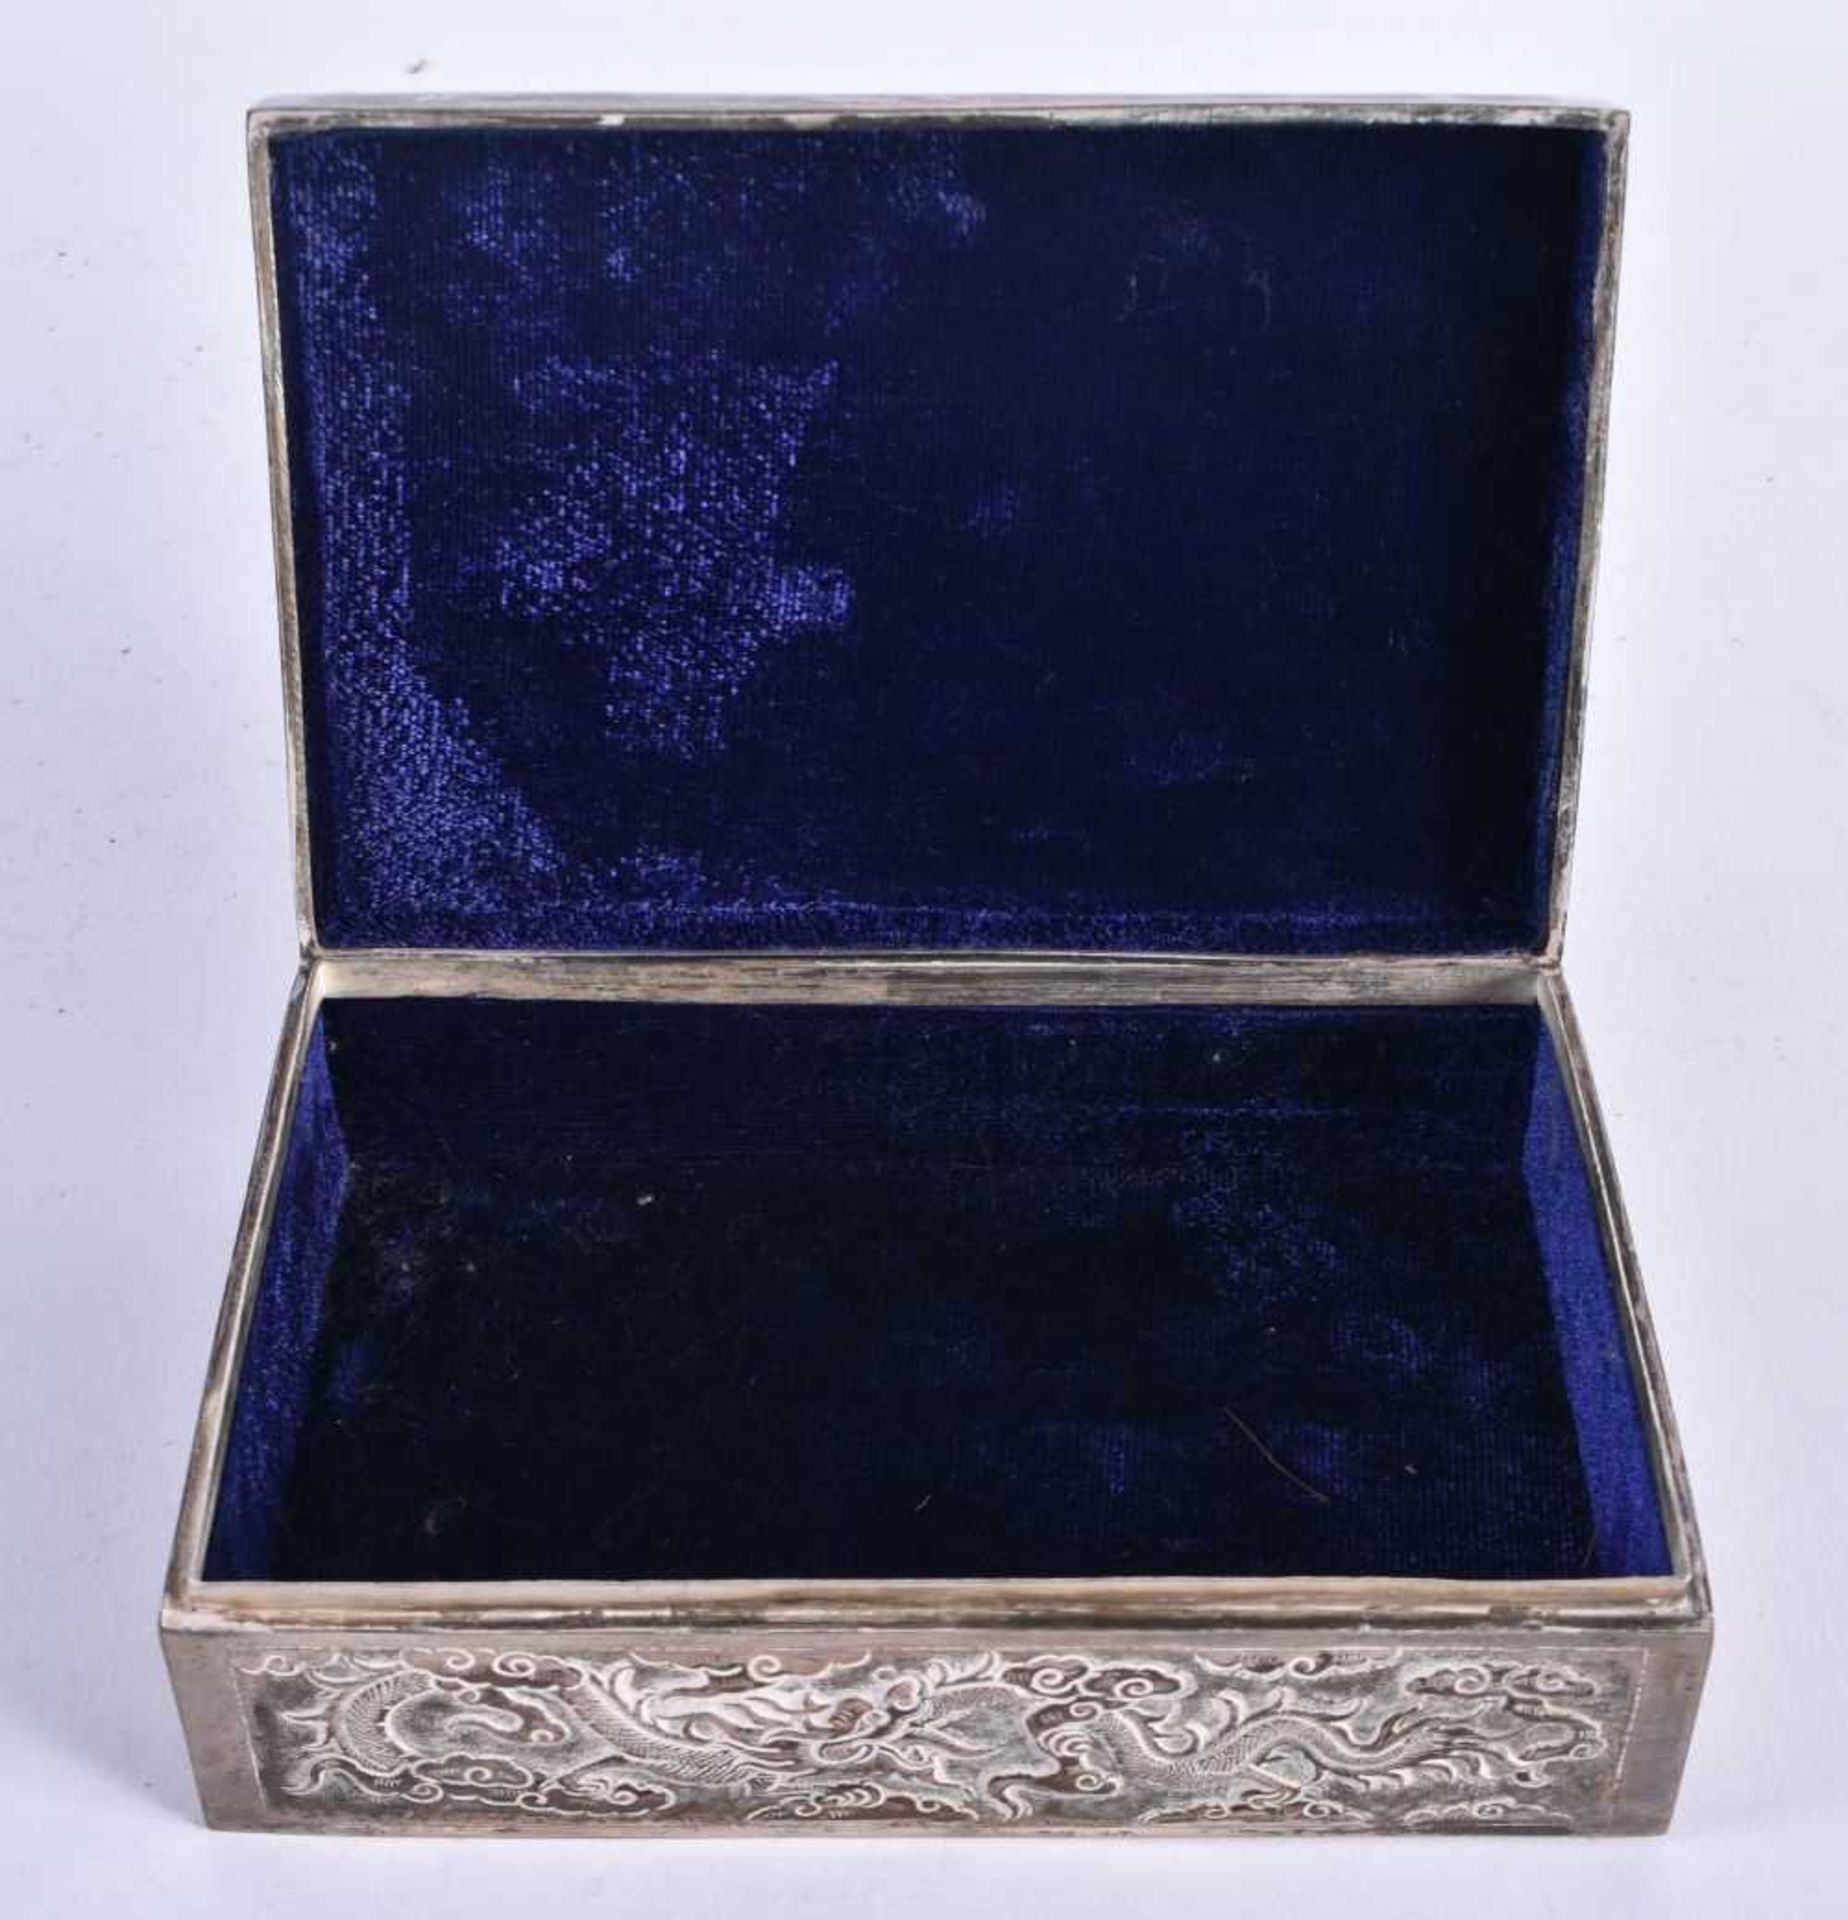 AN ANTIQUE CHINESE SILVER REPOUSSE DRAGON BOX. 267 grams. 15 cm x 10 cm. - Image 2 of 5